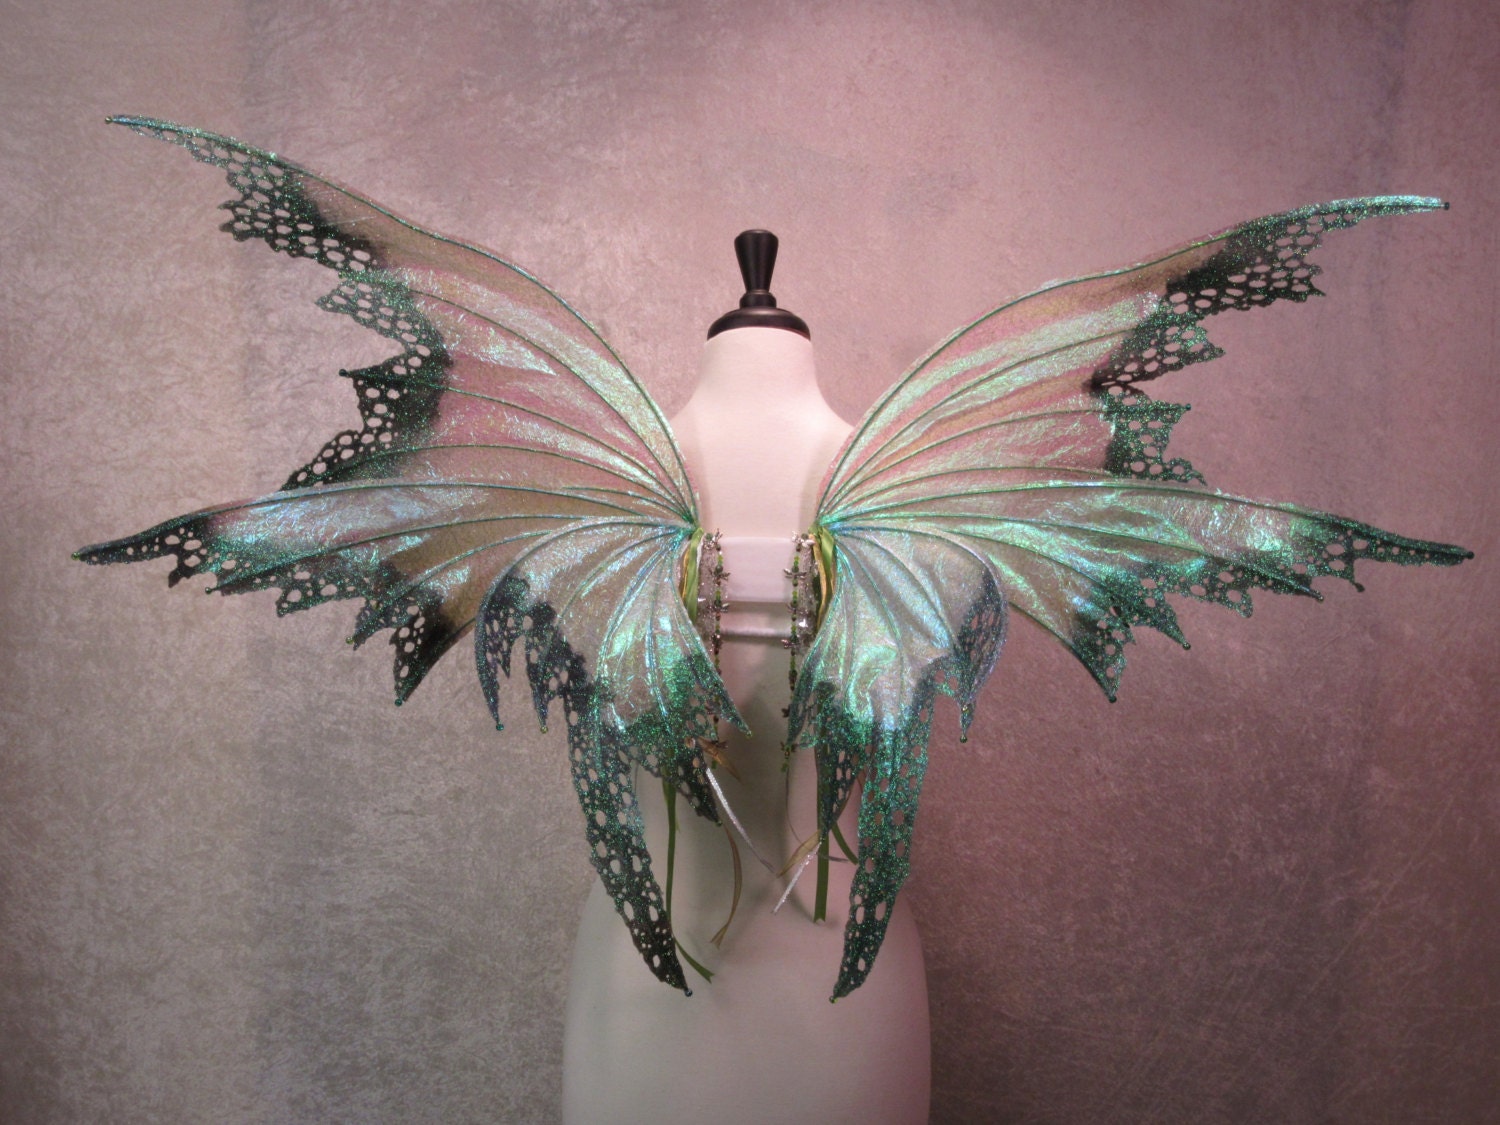 How To Make Pixie Wings